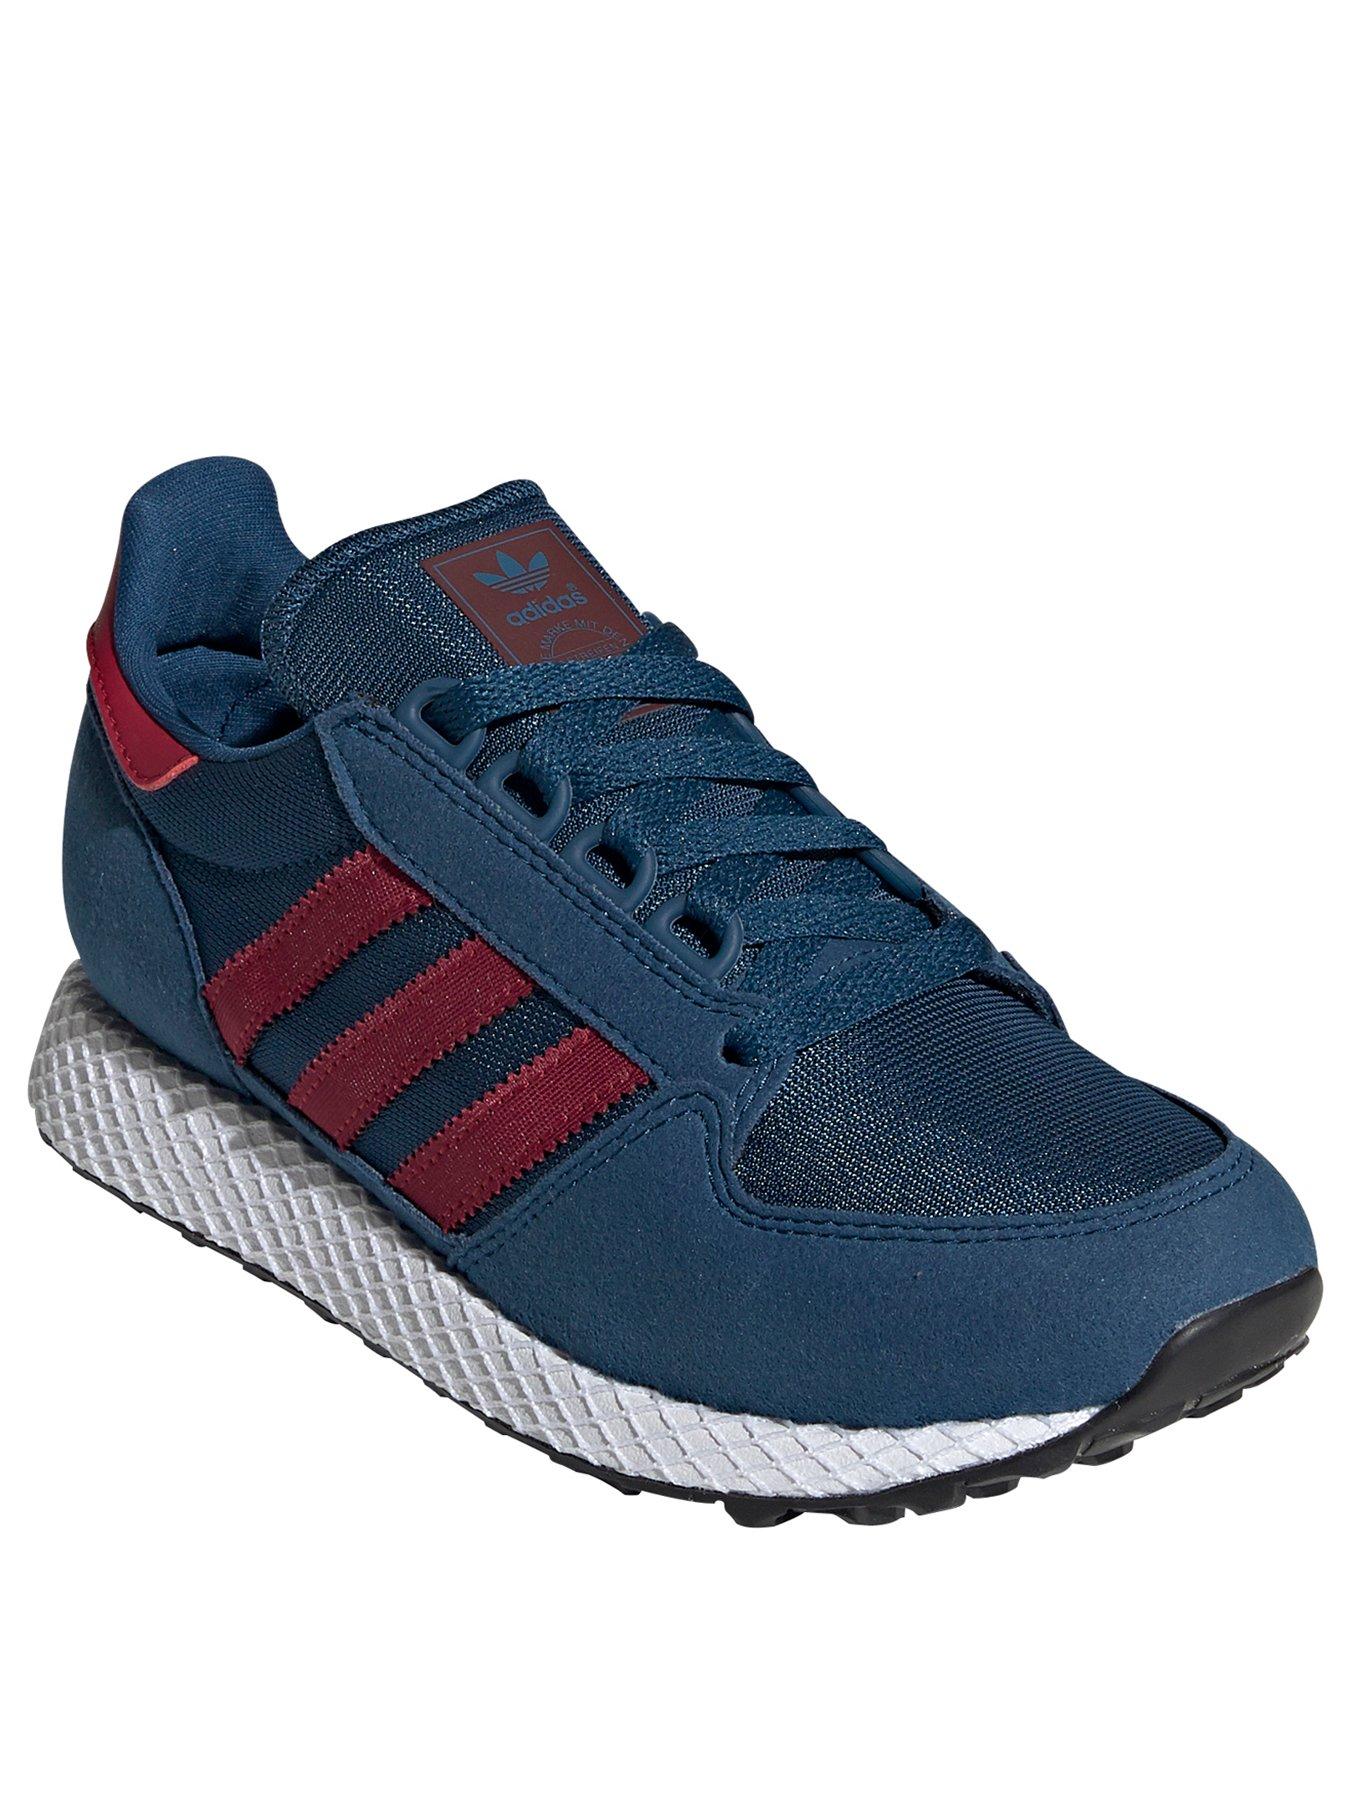 burgundy and blue adidas trainers